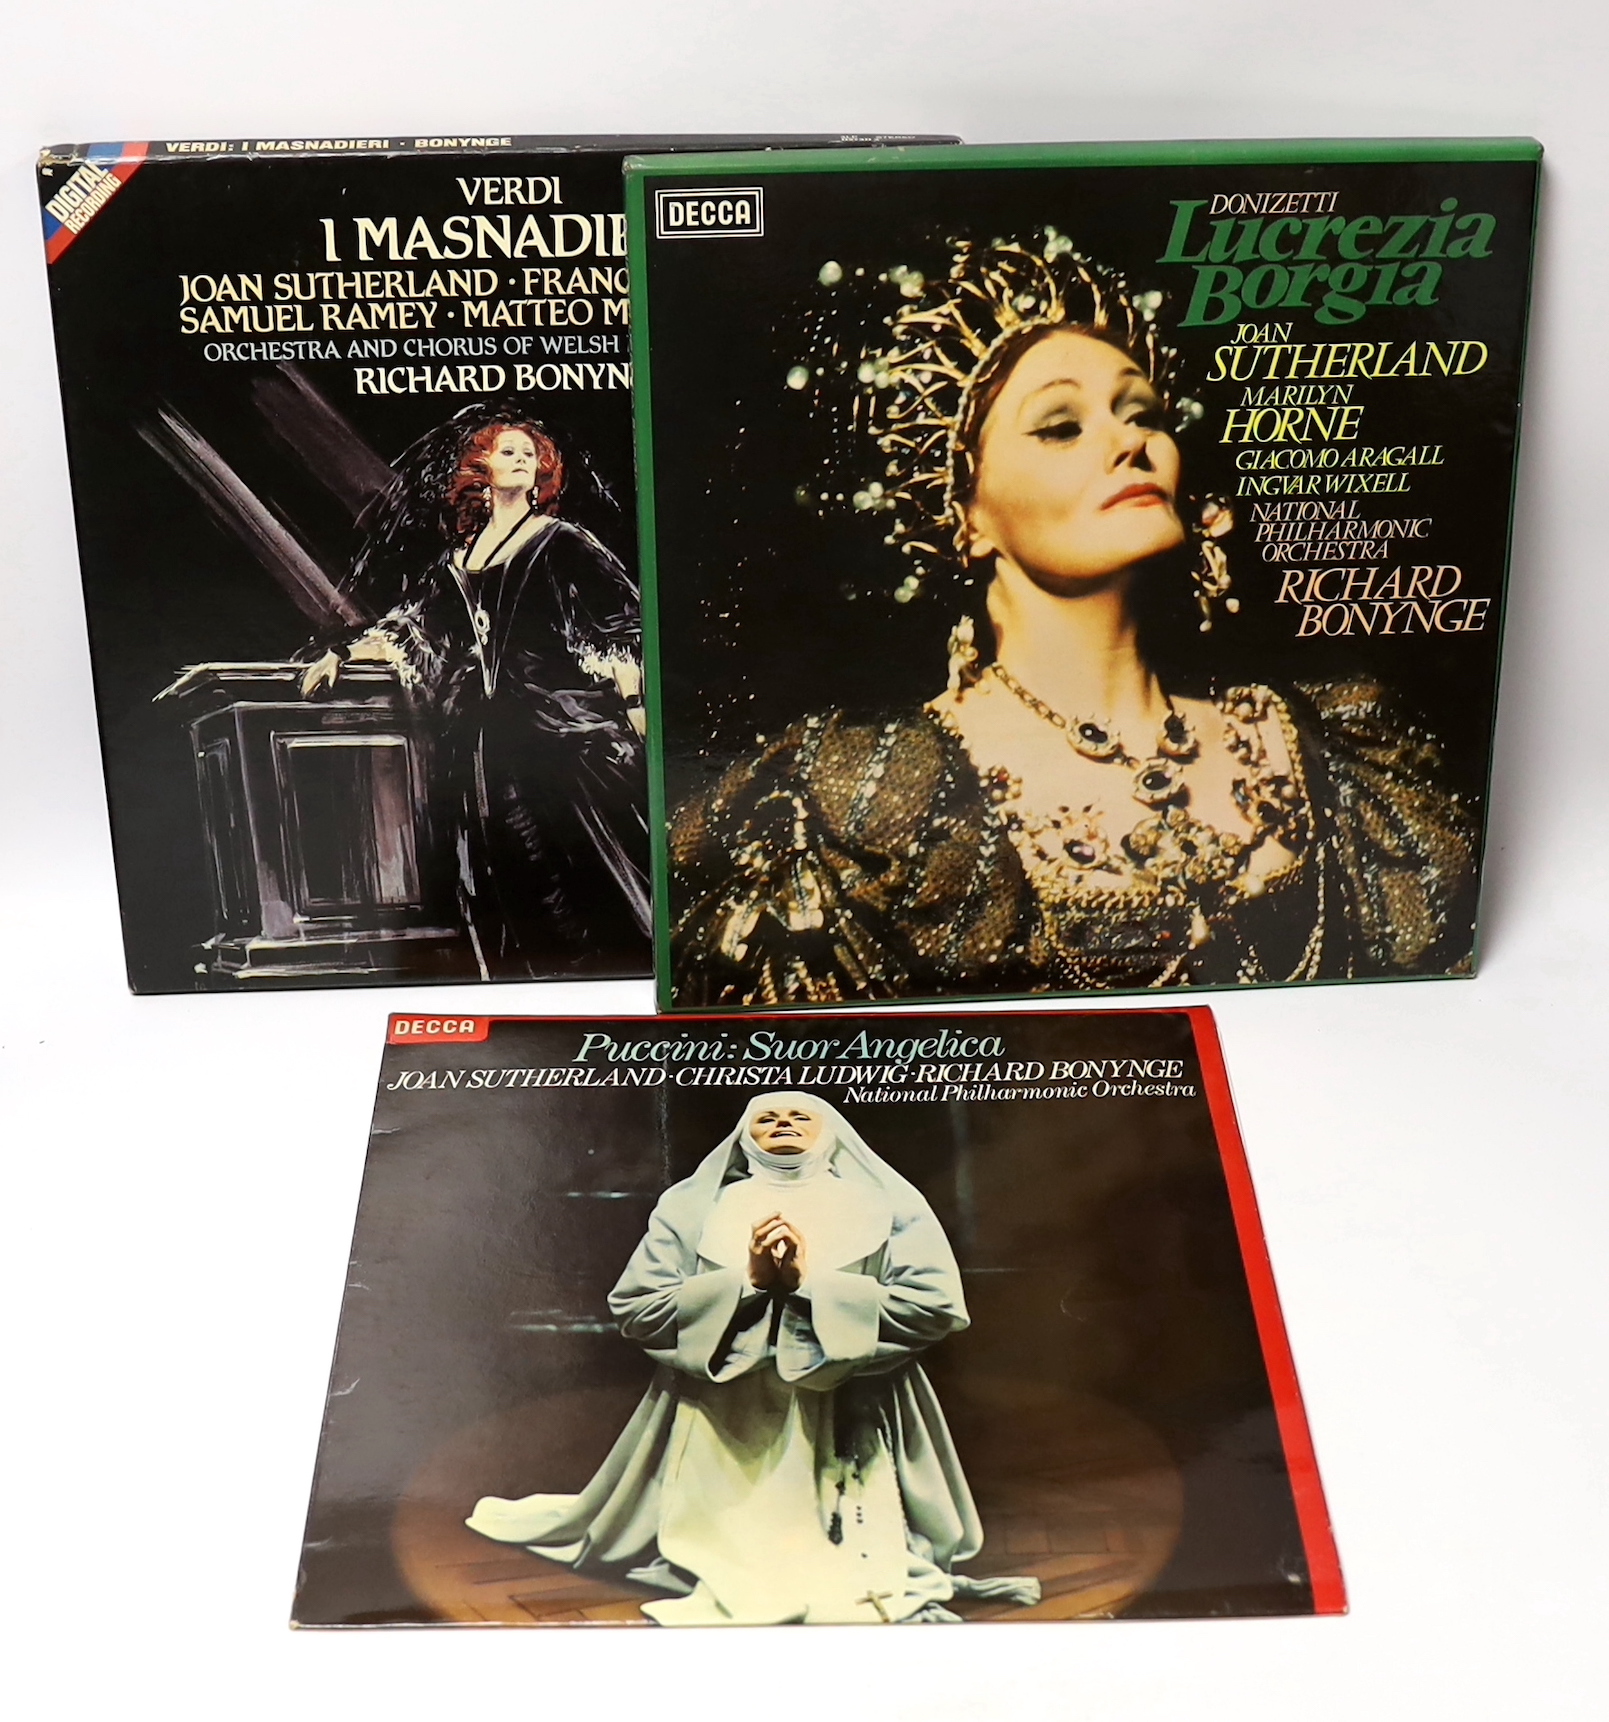 Joan Sutherland interest; a signed LP box set of Donizetti’s Lucretia Borgia, together with a signed LP of Puccini’s Suor Angelica, both signed by Joan Sutherland and Richard Bonynge, plus another unsigned LP box set (3)